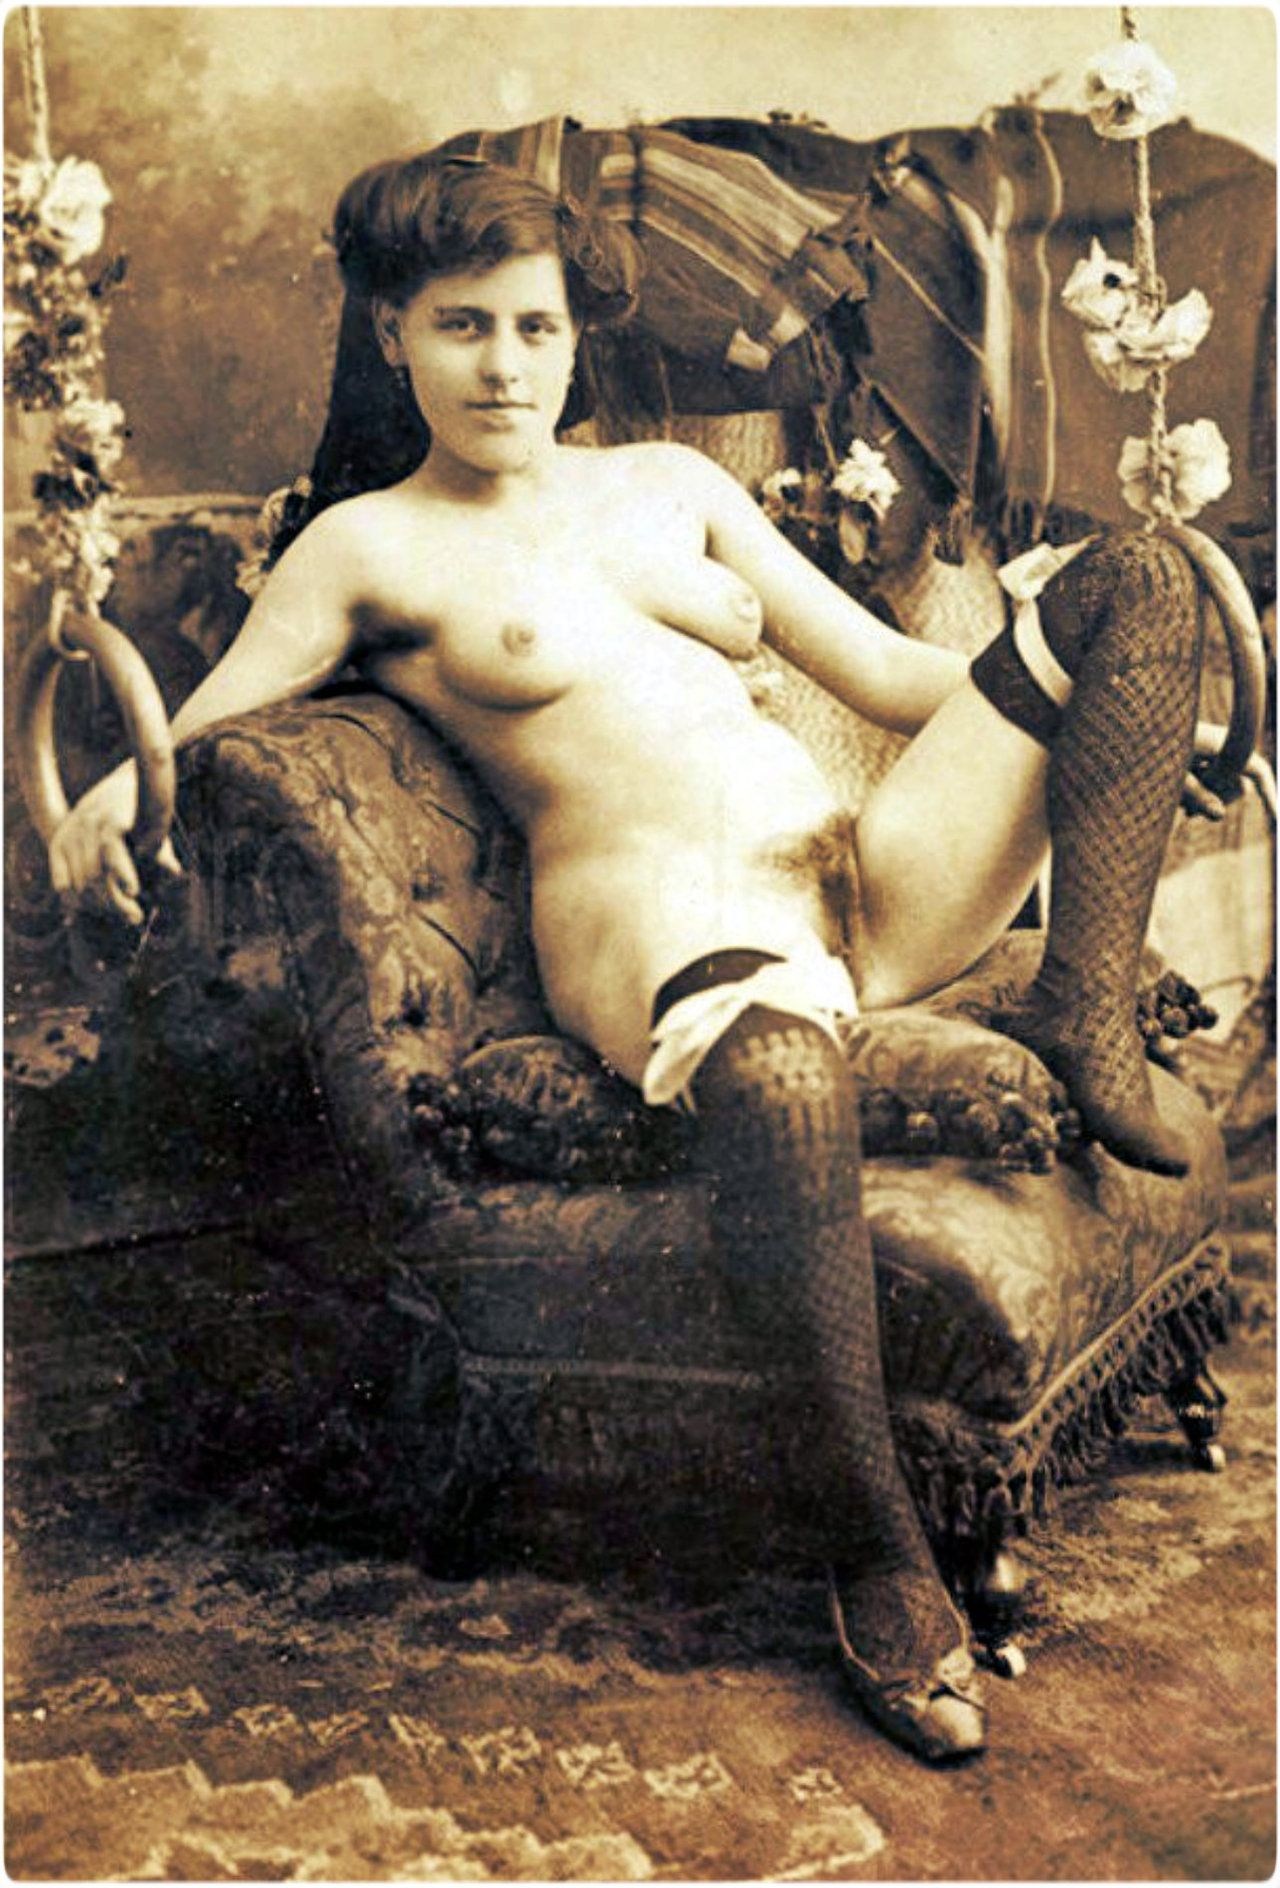 Early 20th century porn